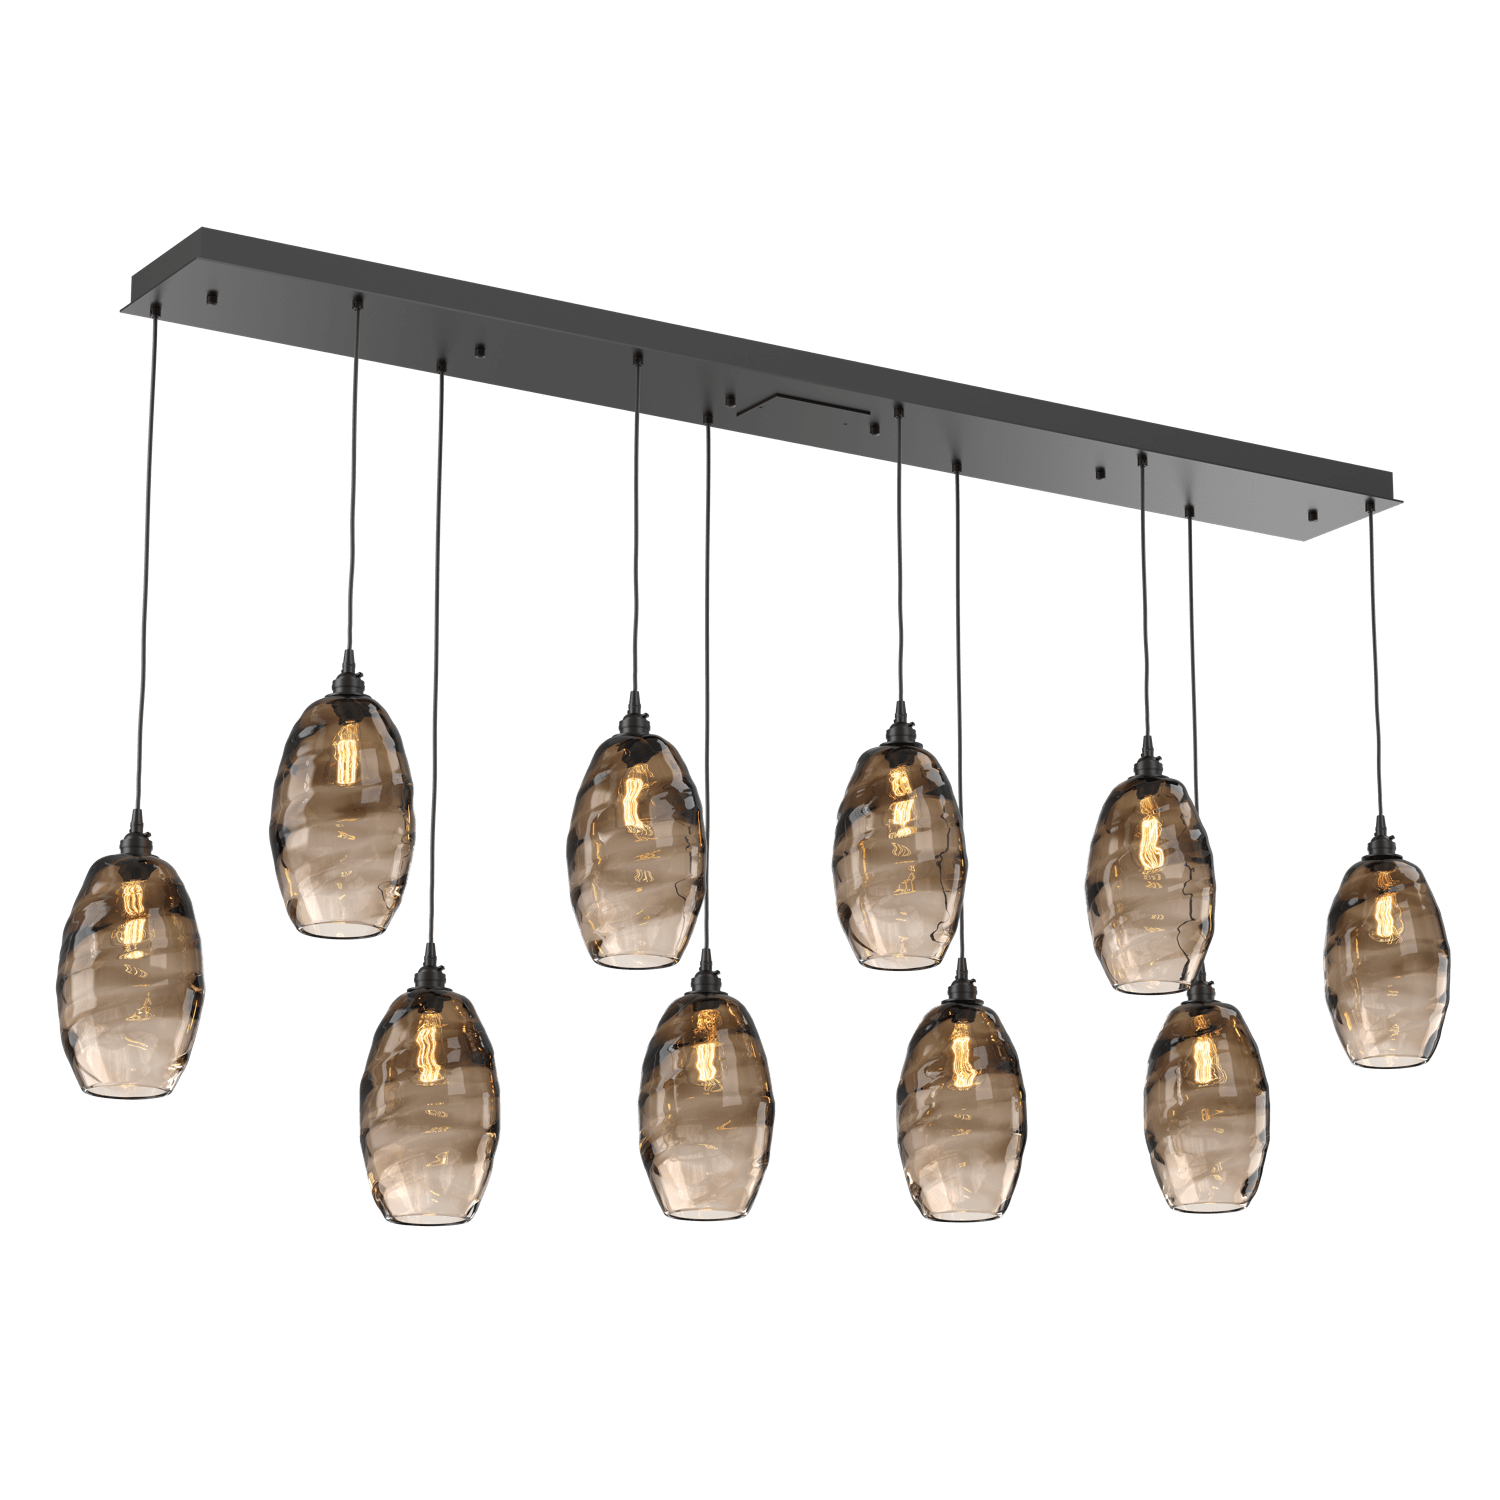 PLB0035-10-MB-OB-Hammerton-Studio-Optic-Blown-Glass-Elisse-10-light-linear-pendant-chandelier-with-matte-black-finish-and-optic-bronze-blown-glass-shades-and-incandescent-lamping